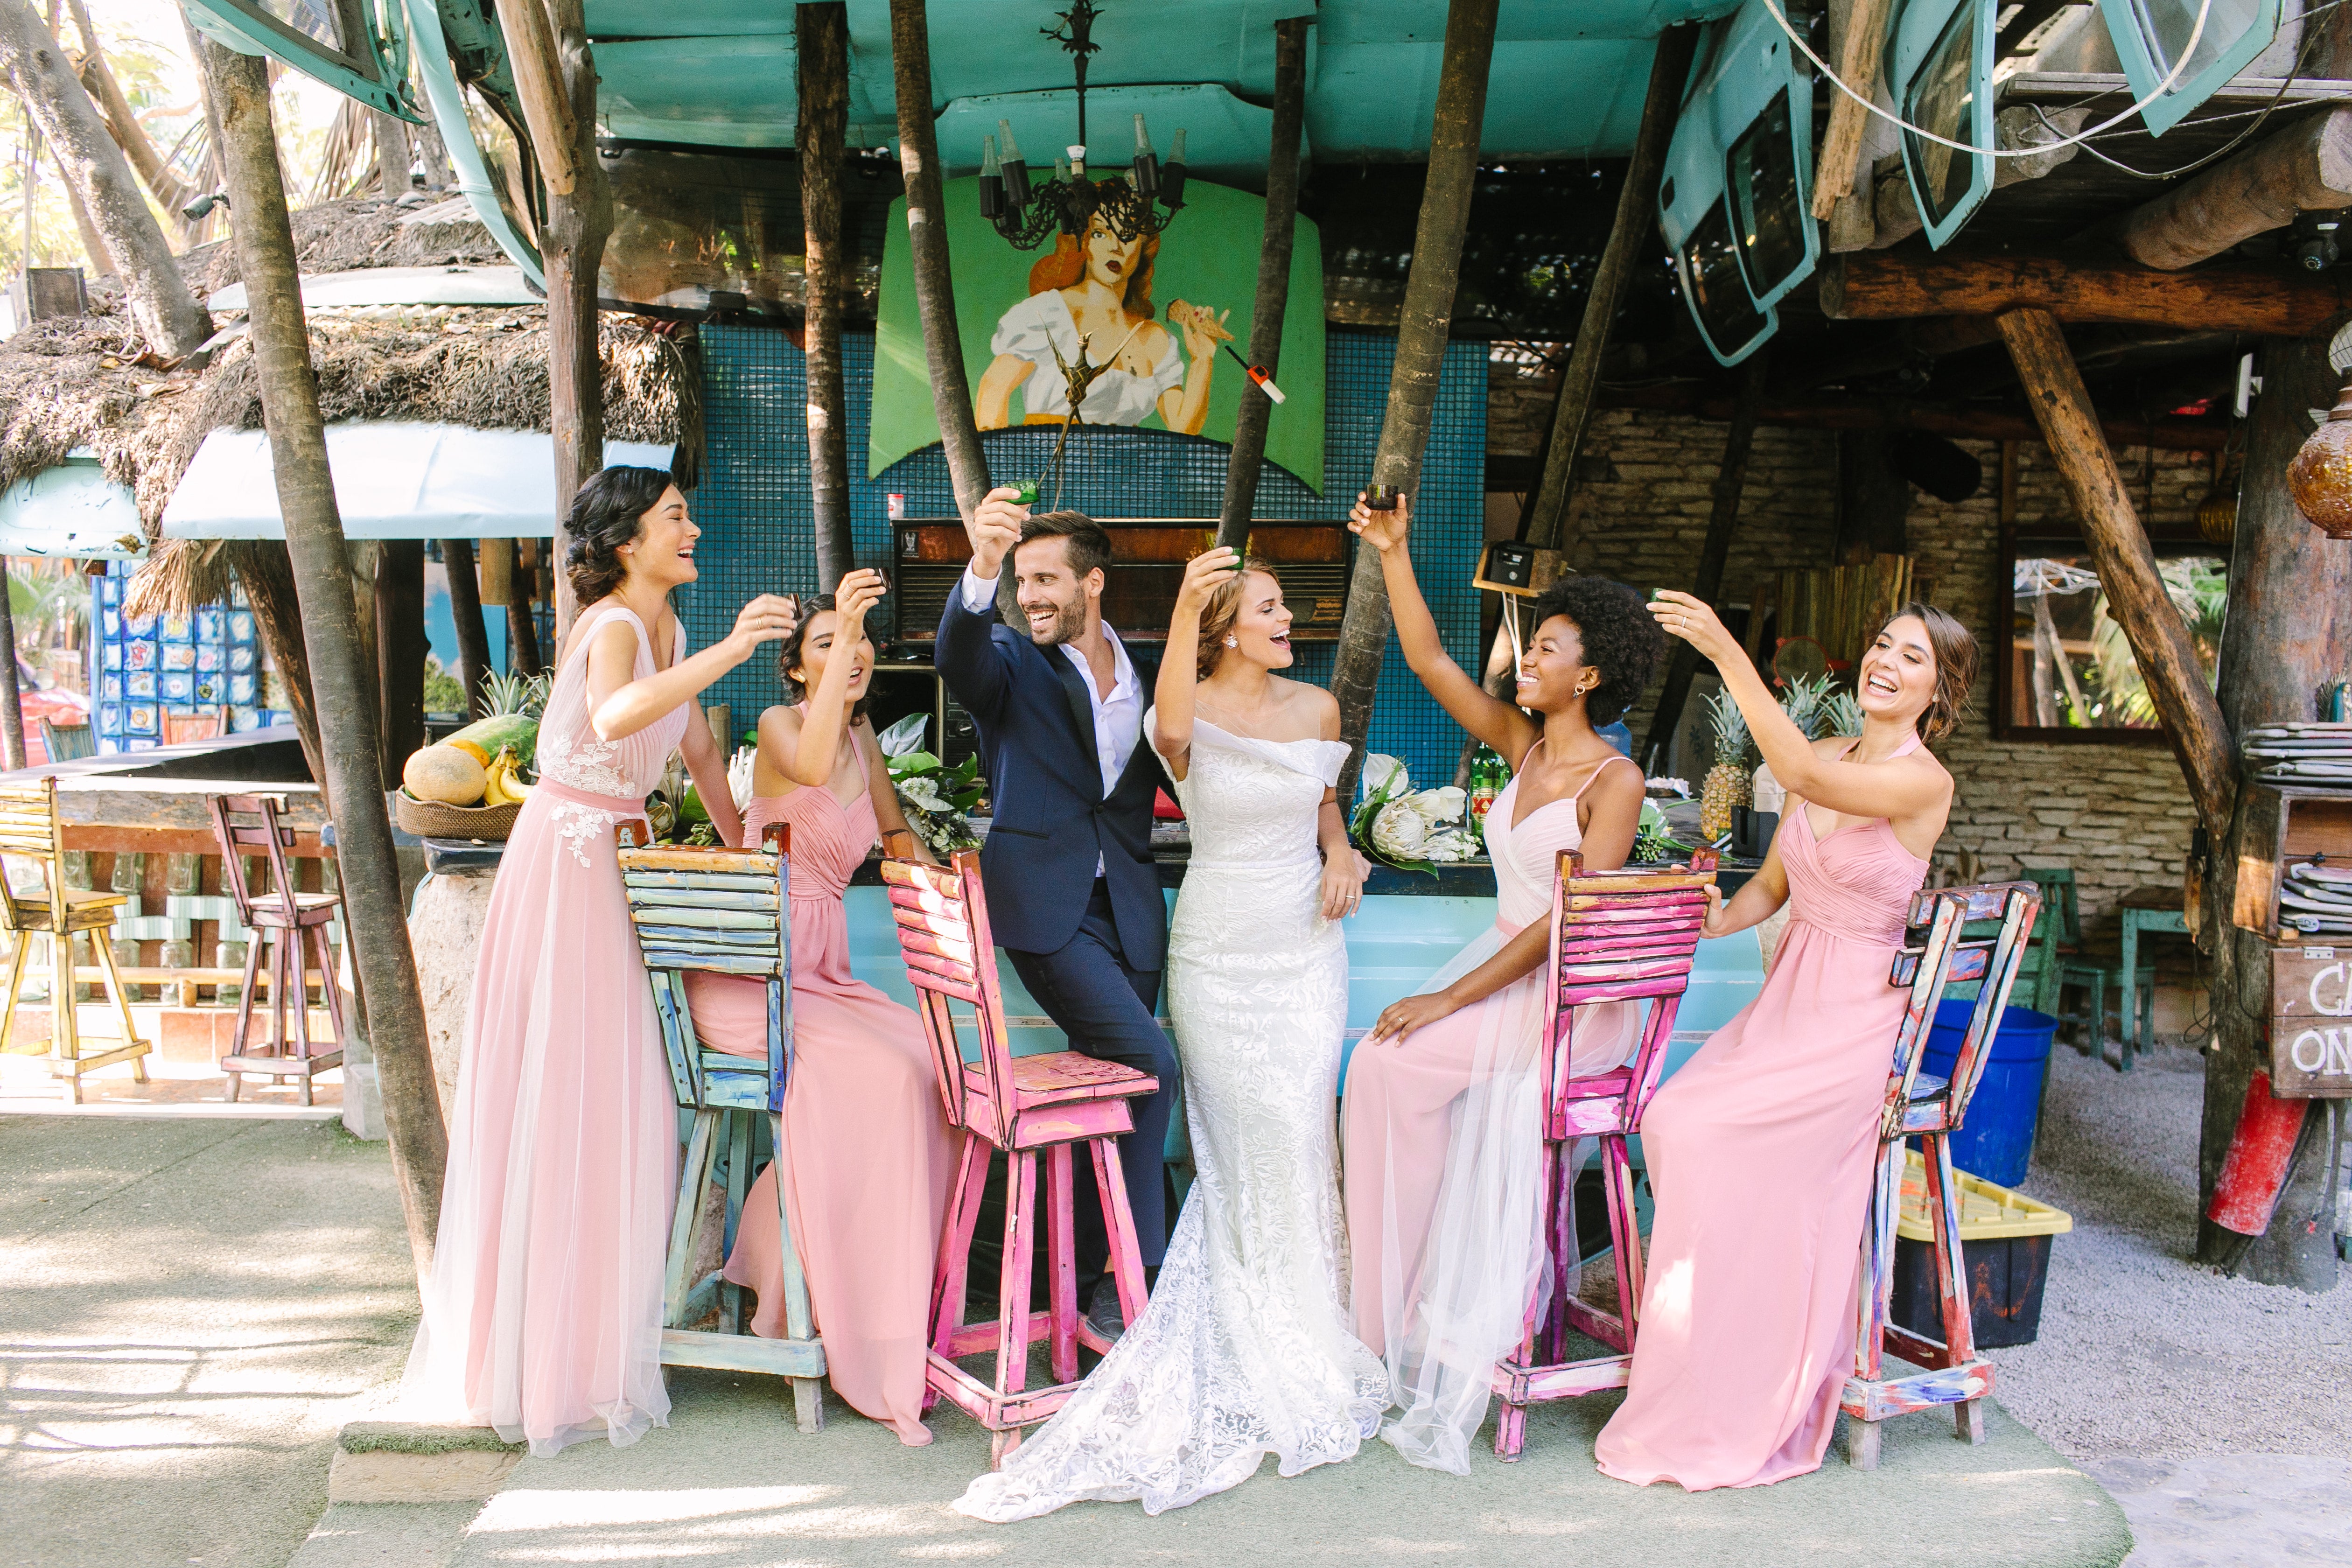 7 tips for wedding photos you'll love: We took Kleinfeld Bridal wedding dresses and Kleinfeld Bridal Party bridesmaids dresses to Tulum, Mexico for a fun photoshoot on the beach full of flowers, sun, sand and fun!